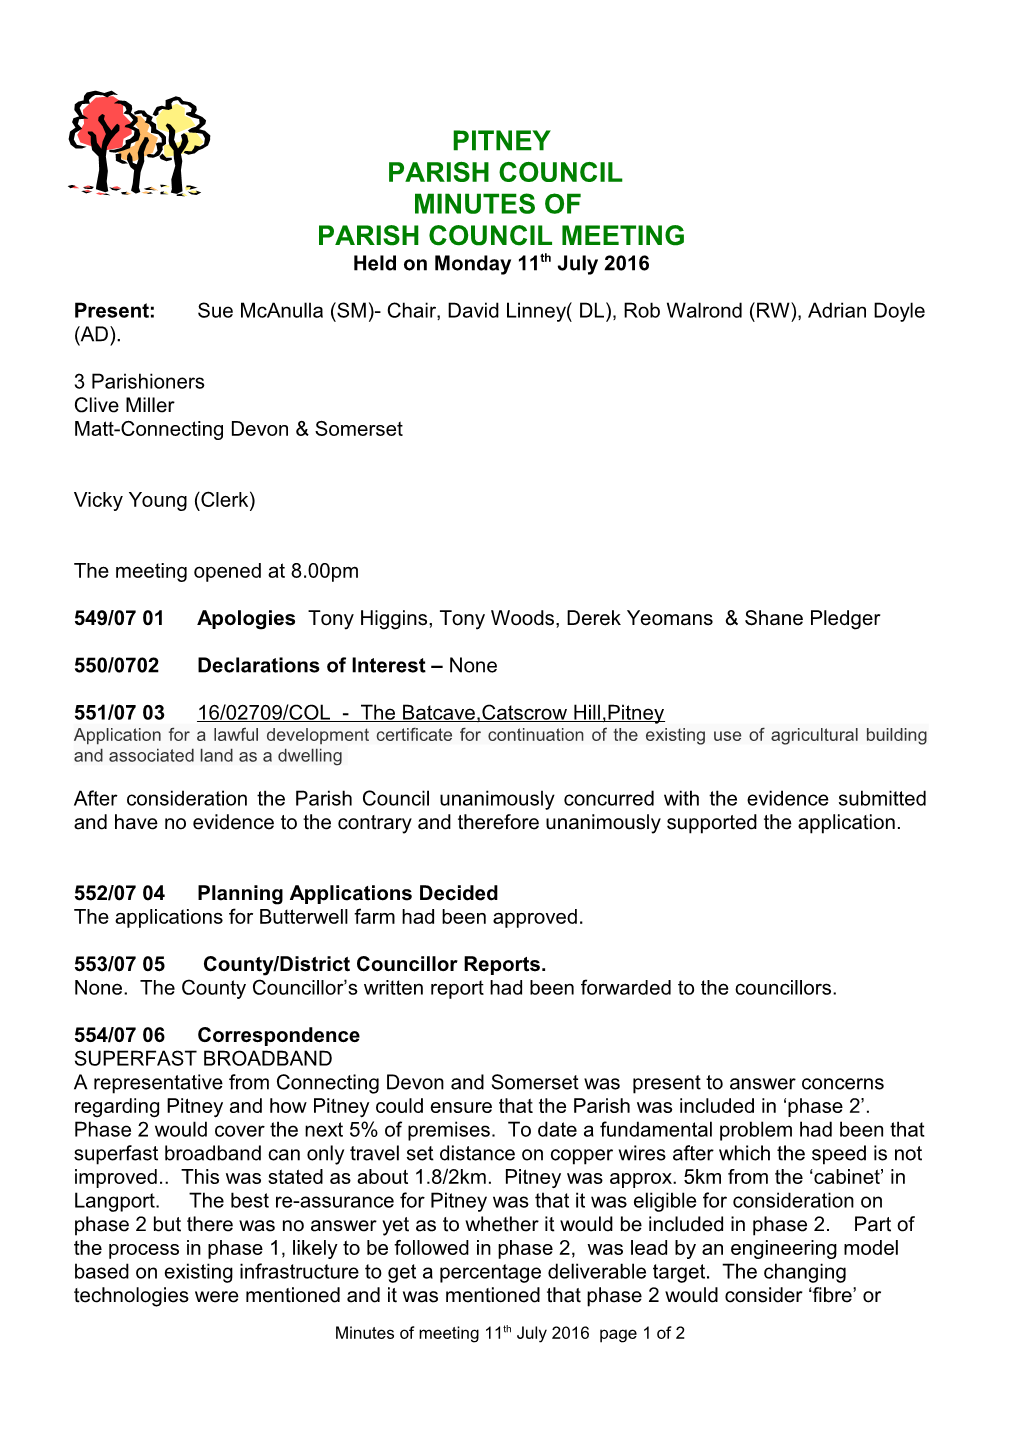 There Was a Meeting of Pitney Parish Council on Monday 7Th March 2005 in the Village Hall